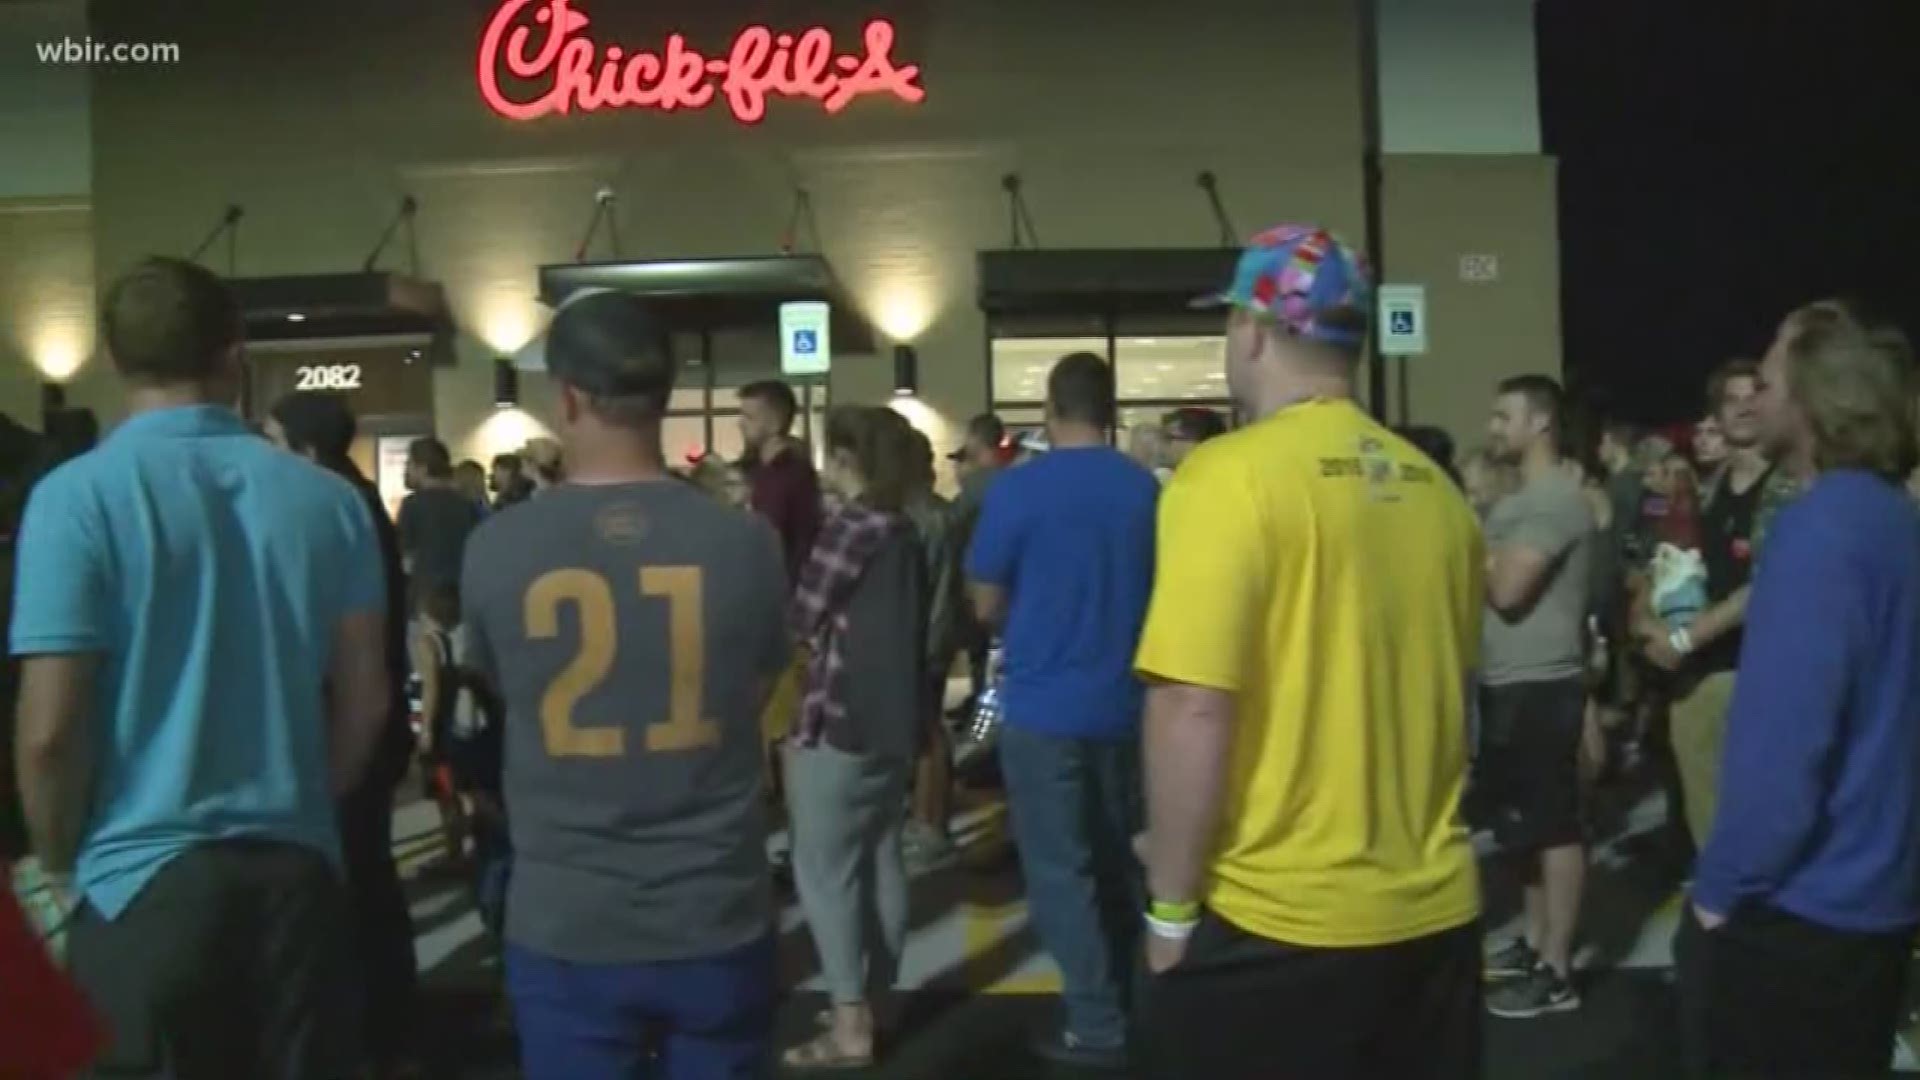 Dozens of people were standing outside the new Knoxville Chick-fil-A hoping to win free food Thursday morning. Meteorologist Rebecca Sweet was live there to take a look.